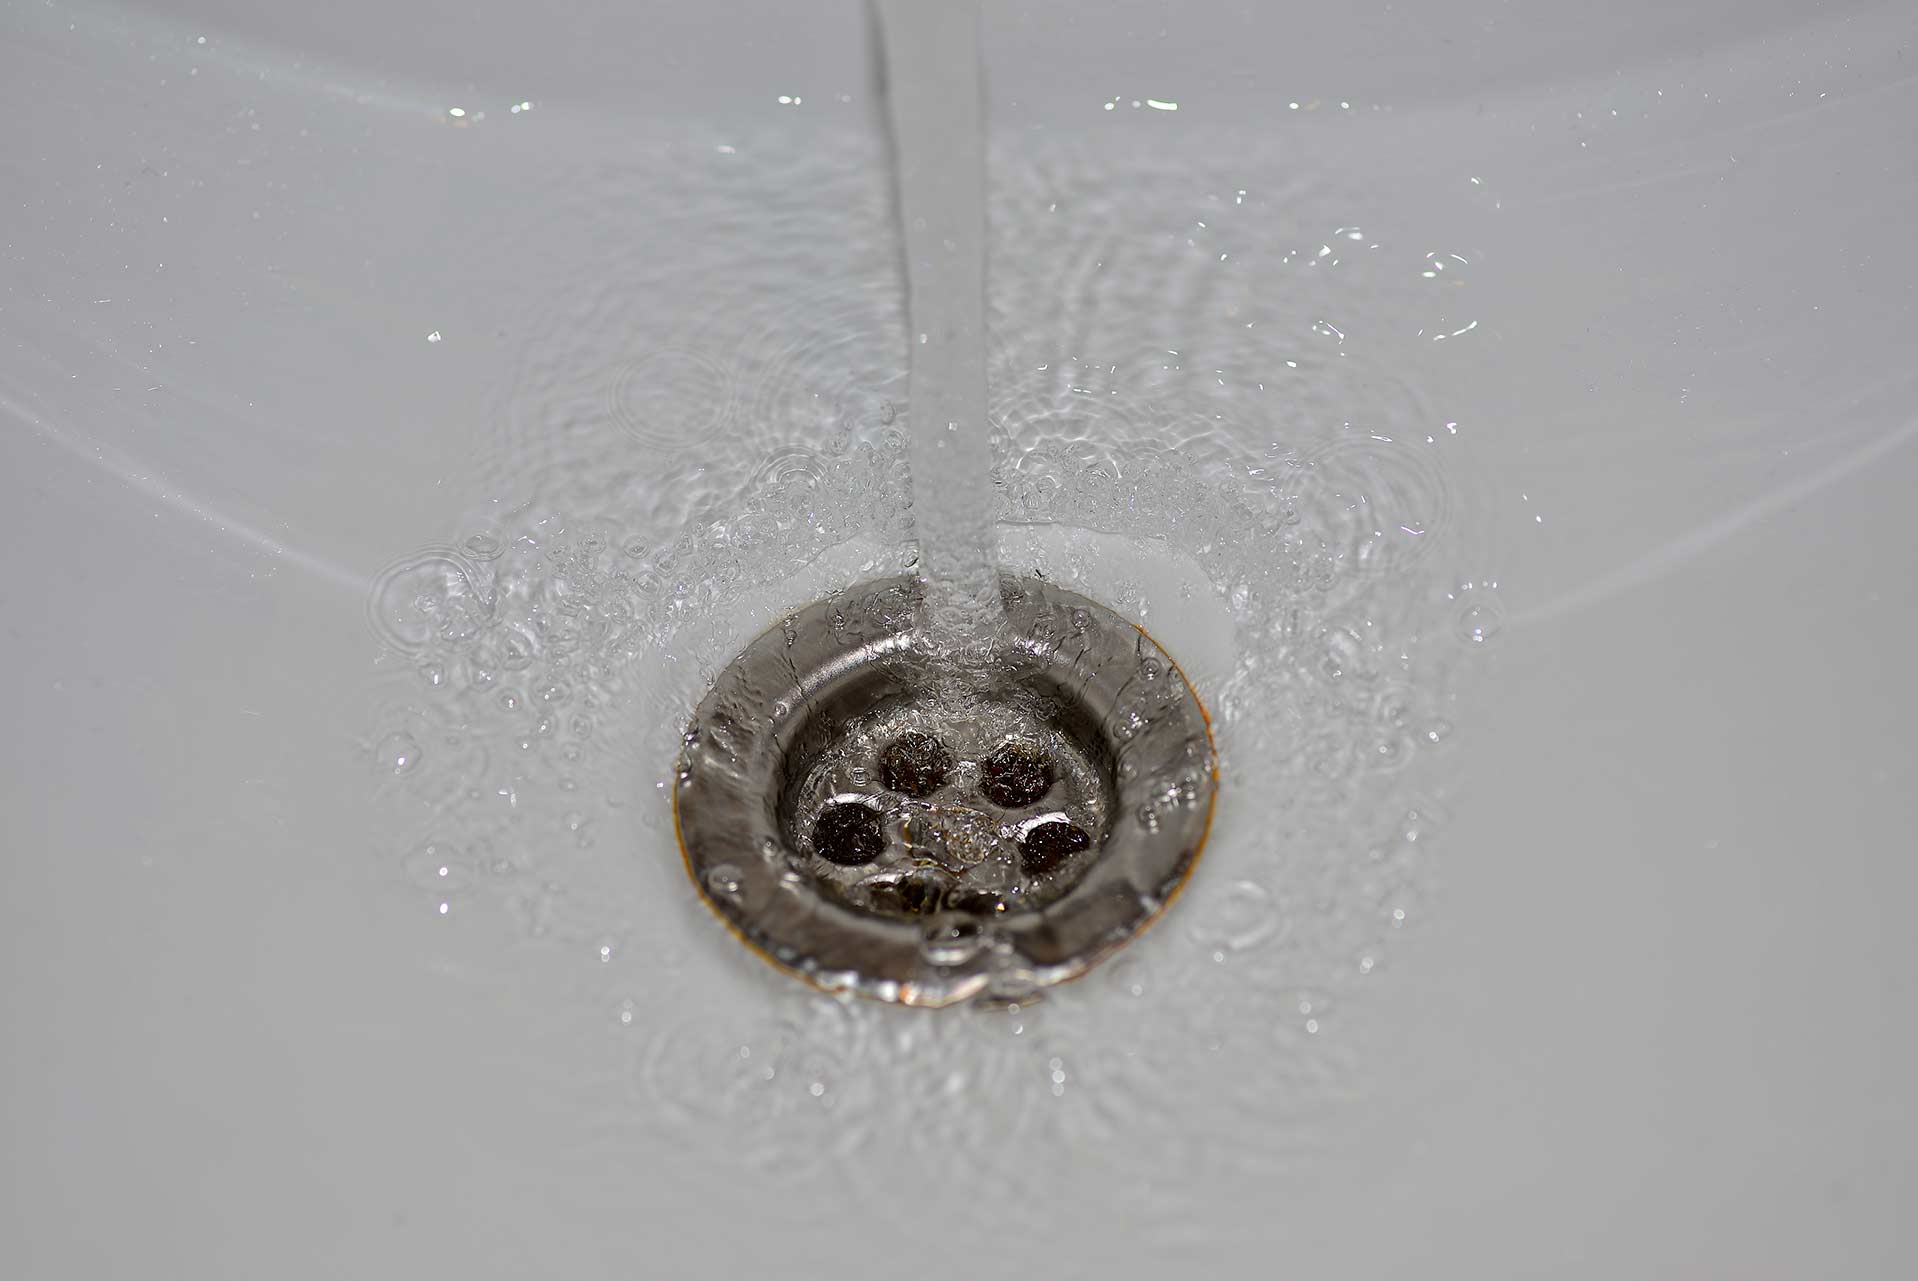 A2B Drains provides services to unblock blocked sinks and drains for properties in Wednesbury.